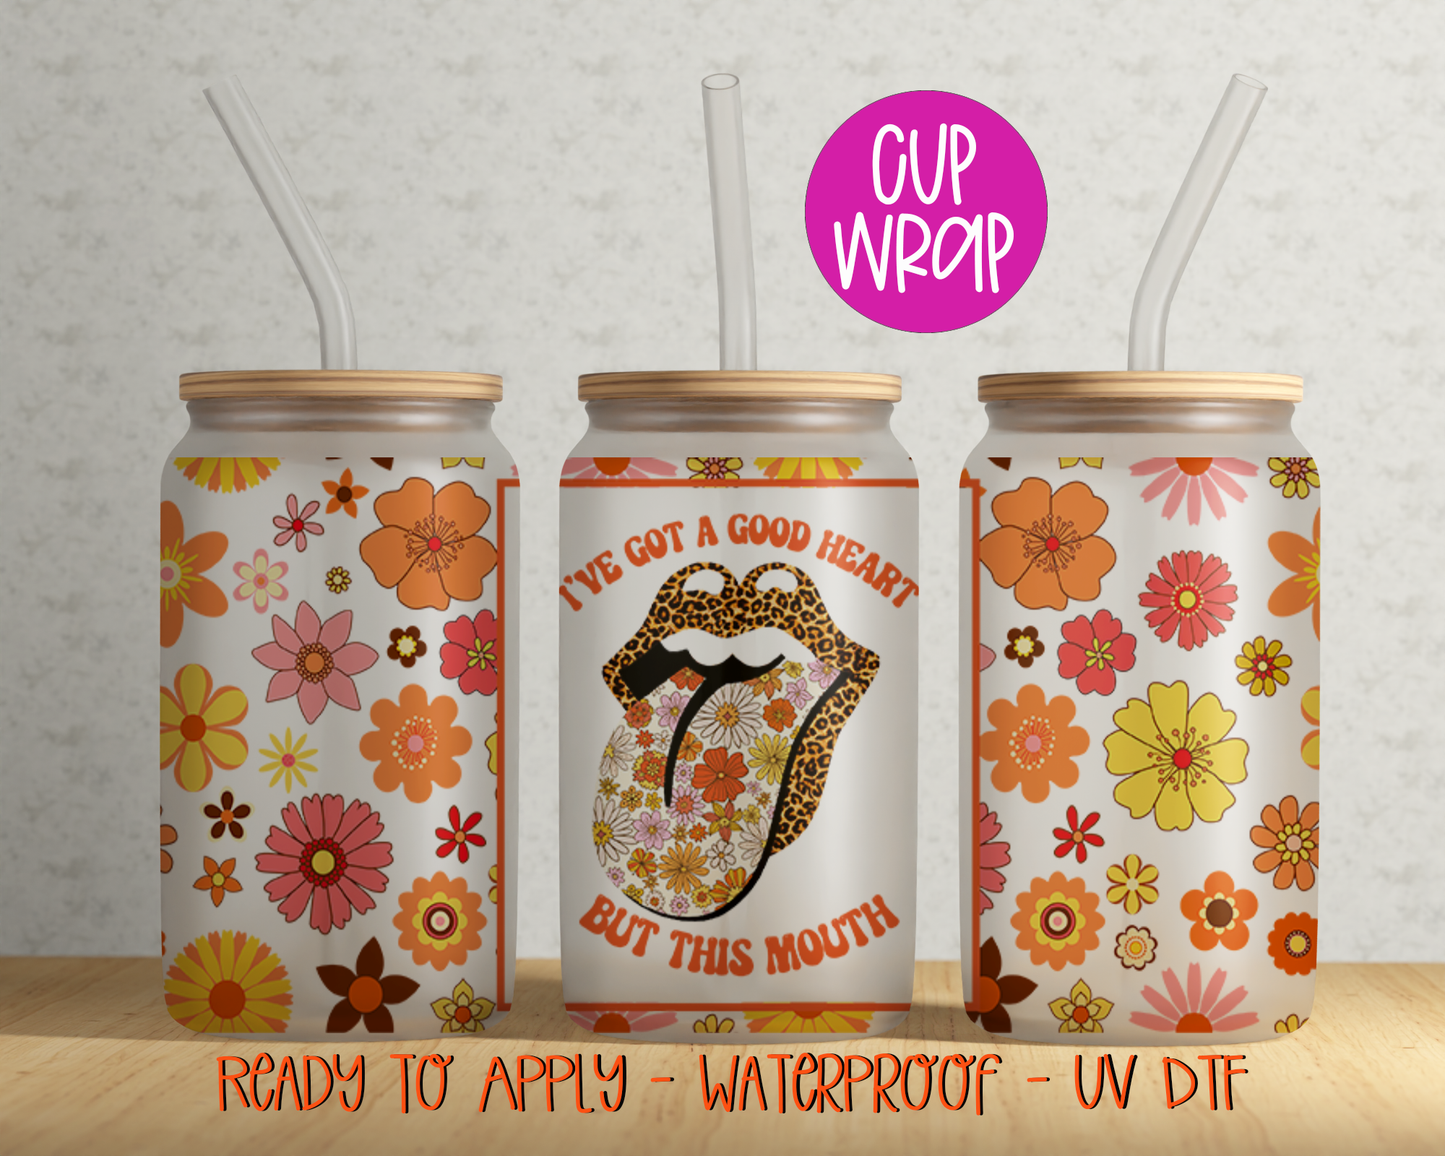 I've Got a Good Heart, But This Mouth 16oz Cup Wrap - UV DTF - DTF008